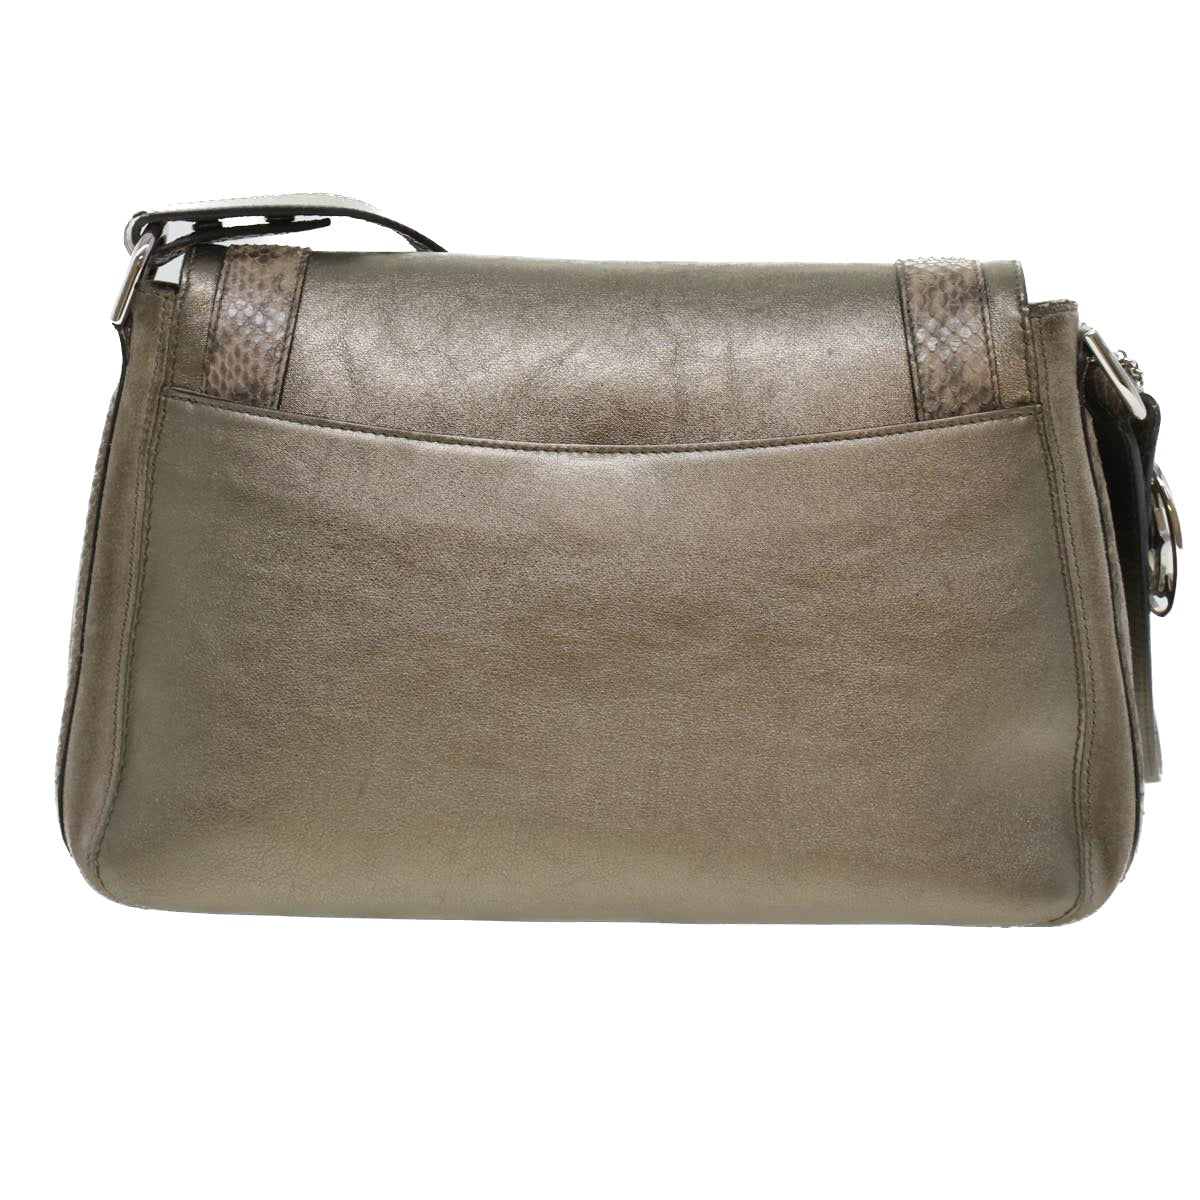 Chloe Shoulder Bag Suede Leather Gray Auth 44064 - 0